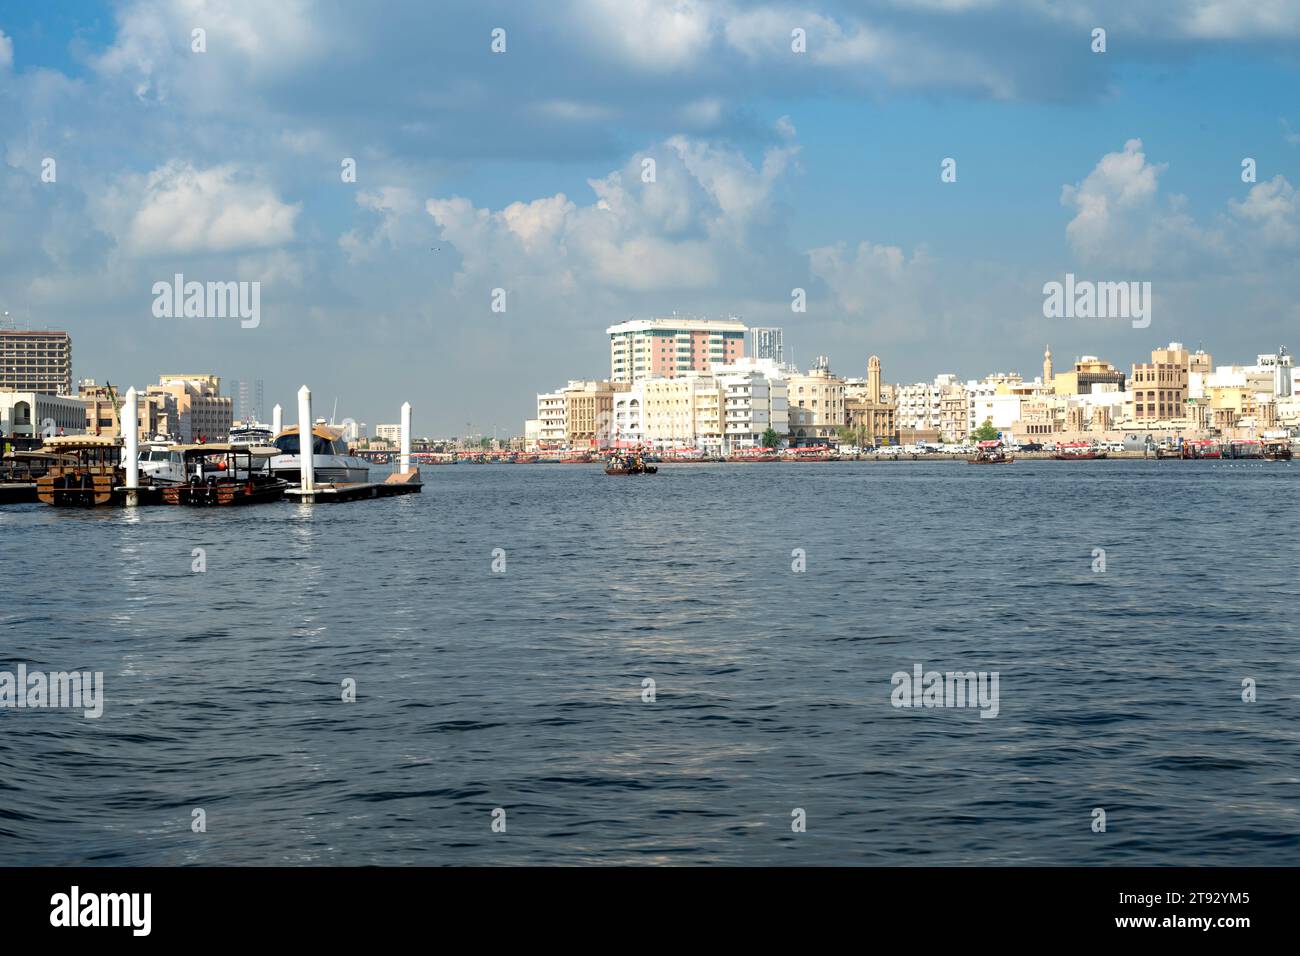 Scenic View of Dubai Creek on a cloudy Day Stock Photo